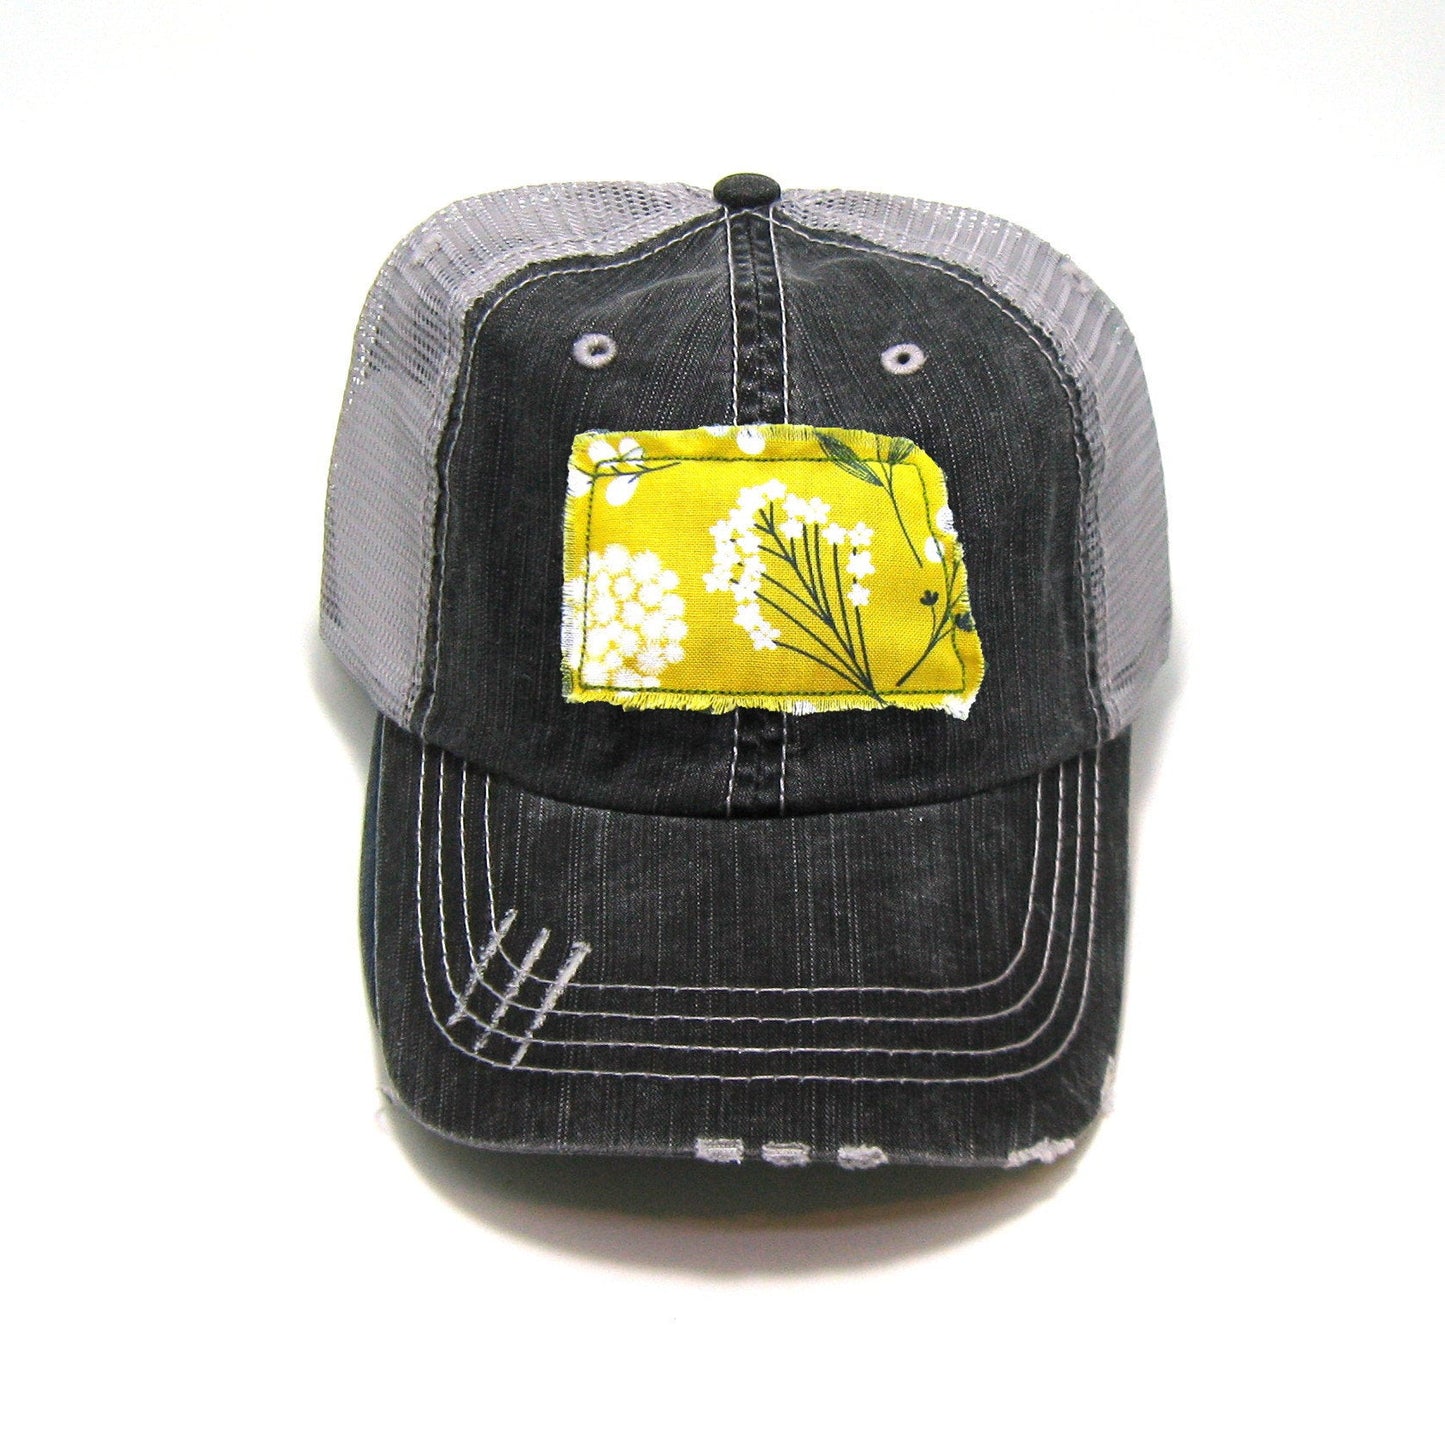 gray distressed trucker hat with gray floral fabric state of North Dakota